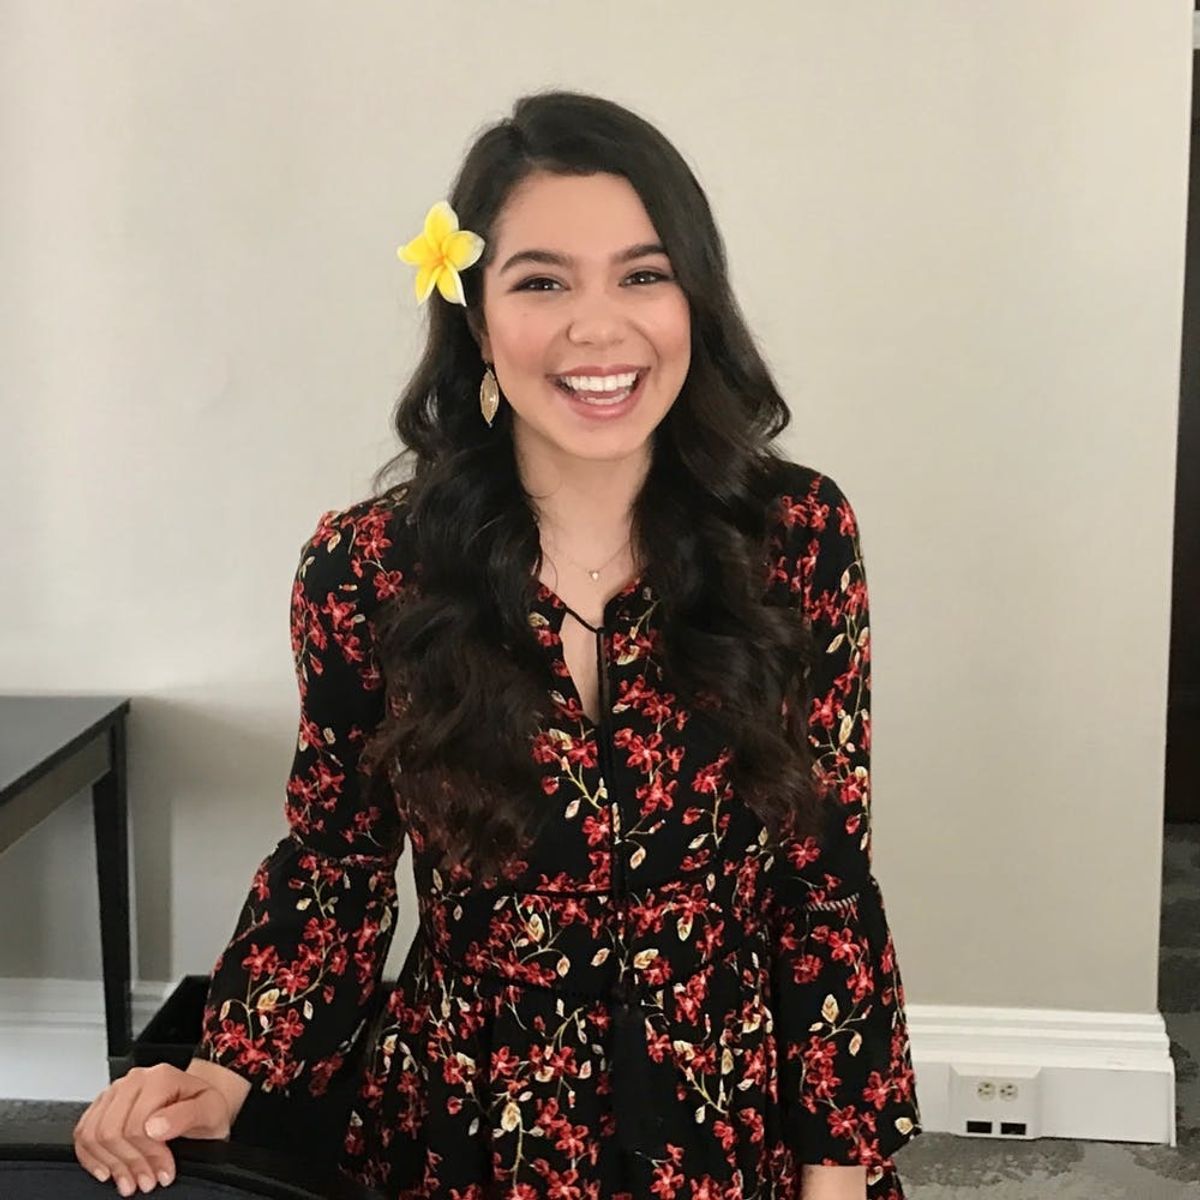 Moana Star Auli’i Cravalho on Her New Life, Her New Gig, and That Oscar Performance